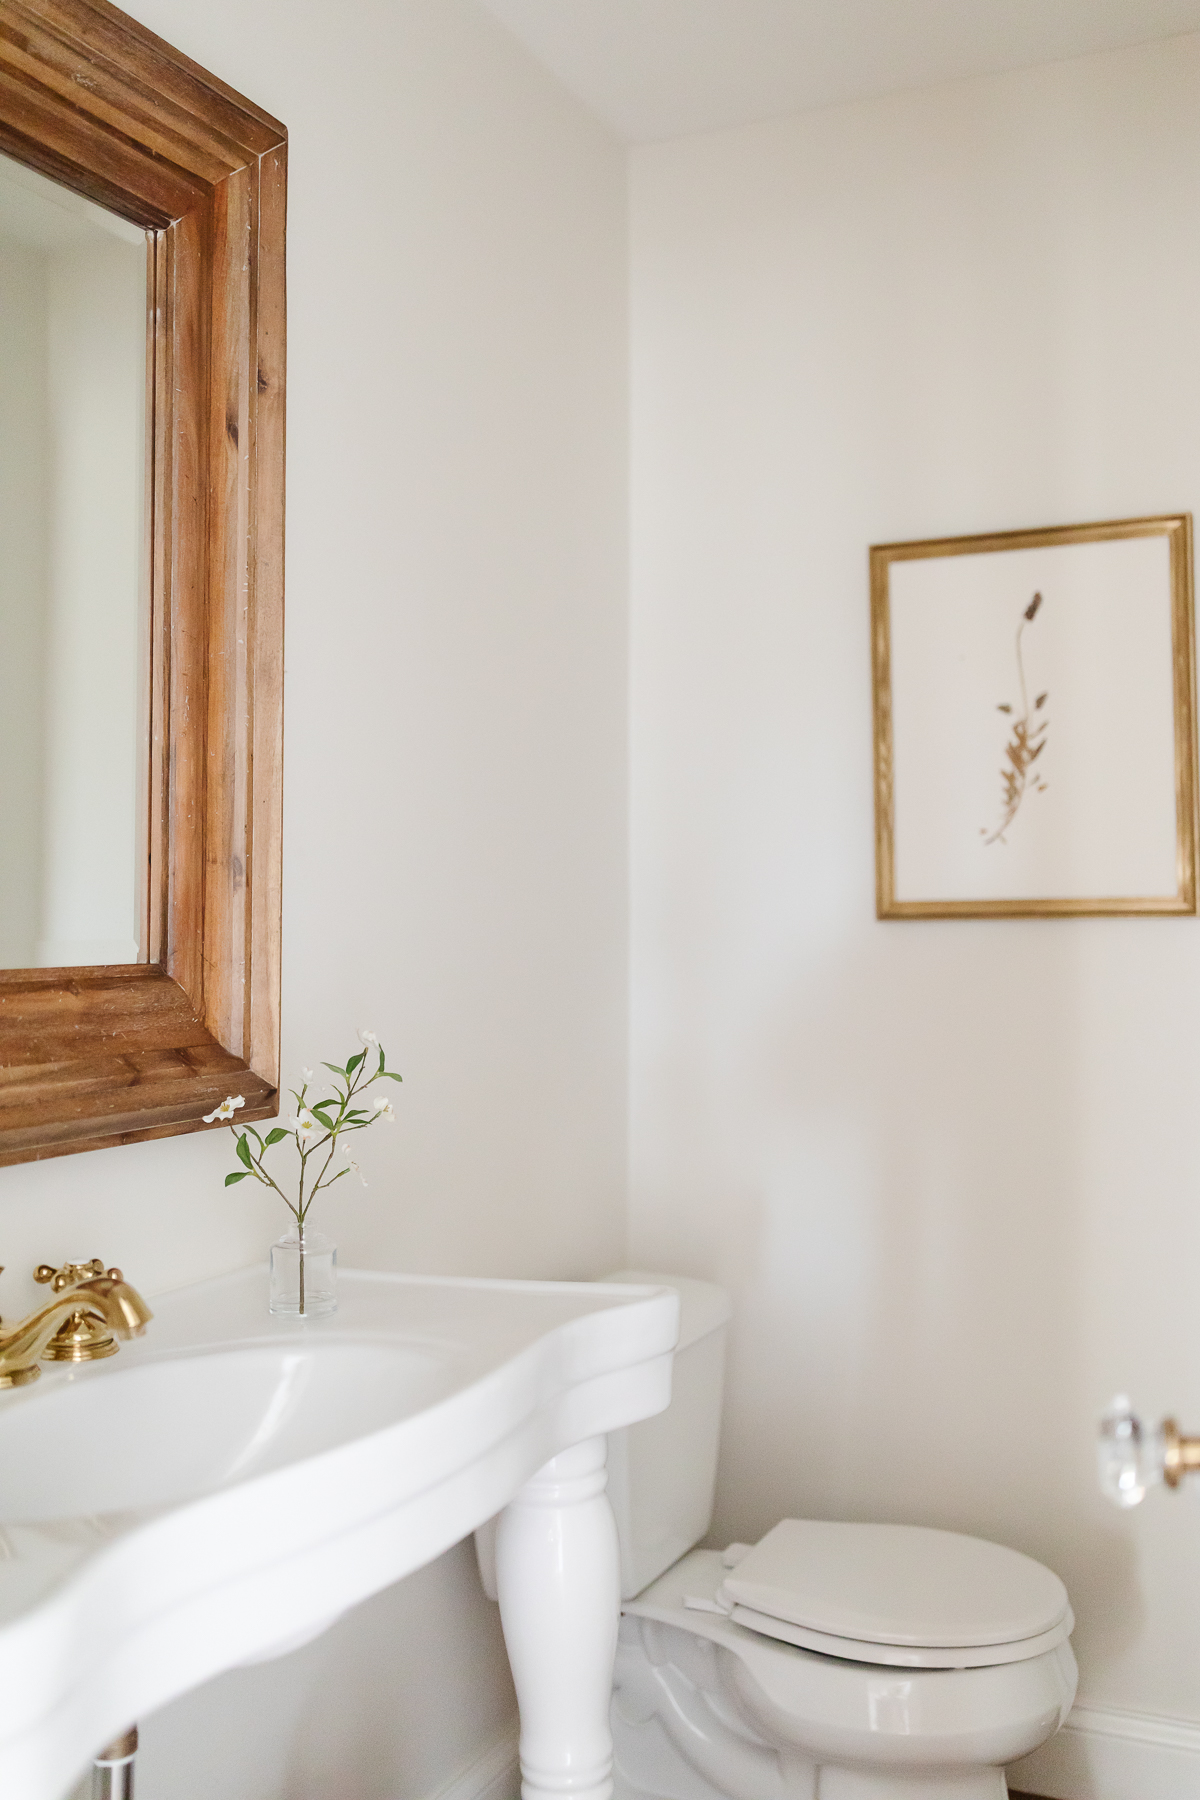 A white bathroom with a wooden vanity and mirror decorated with wall art.